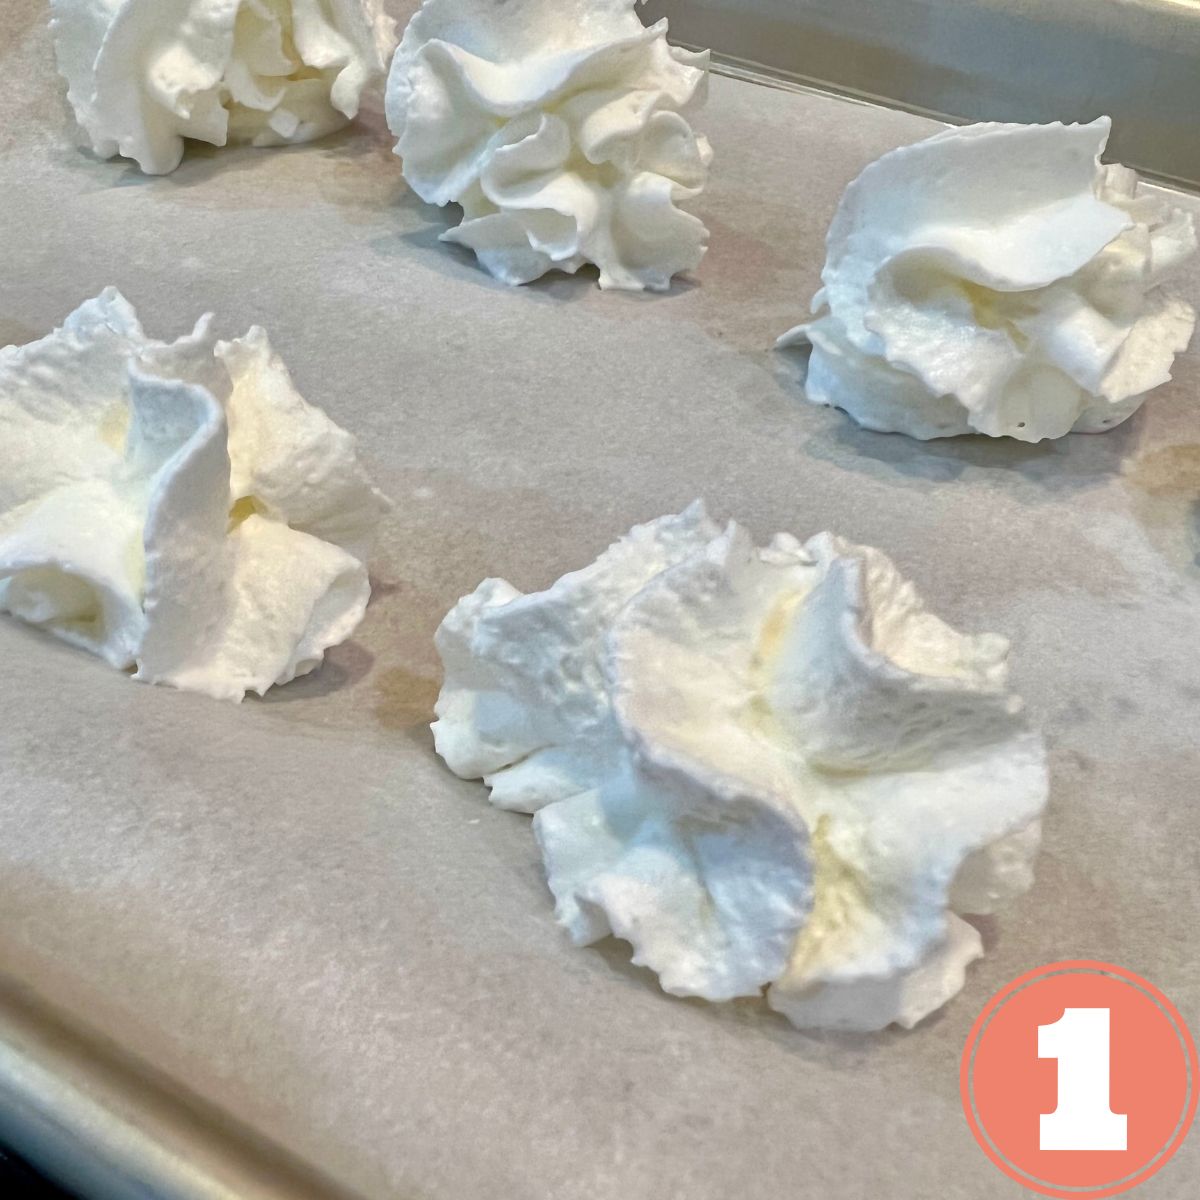 whipped cream dollops on a baking sheet